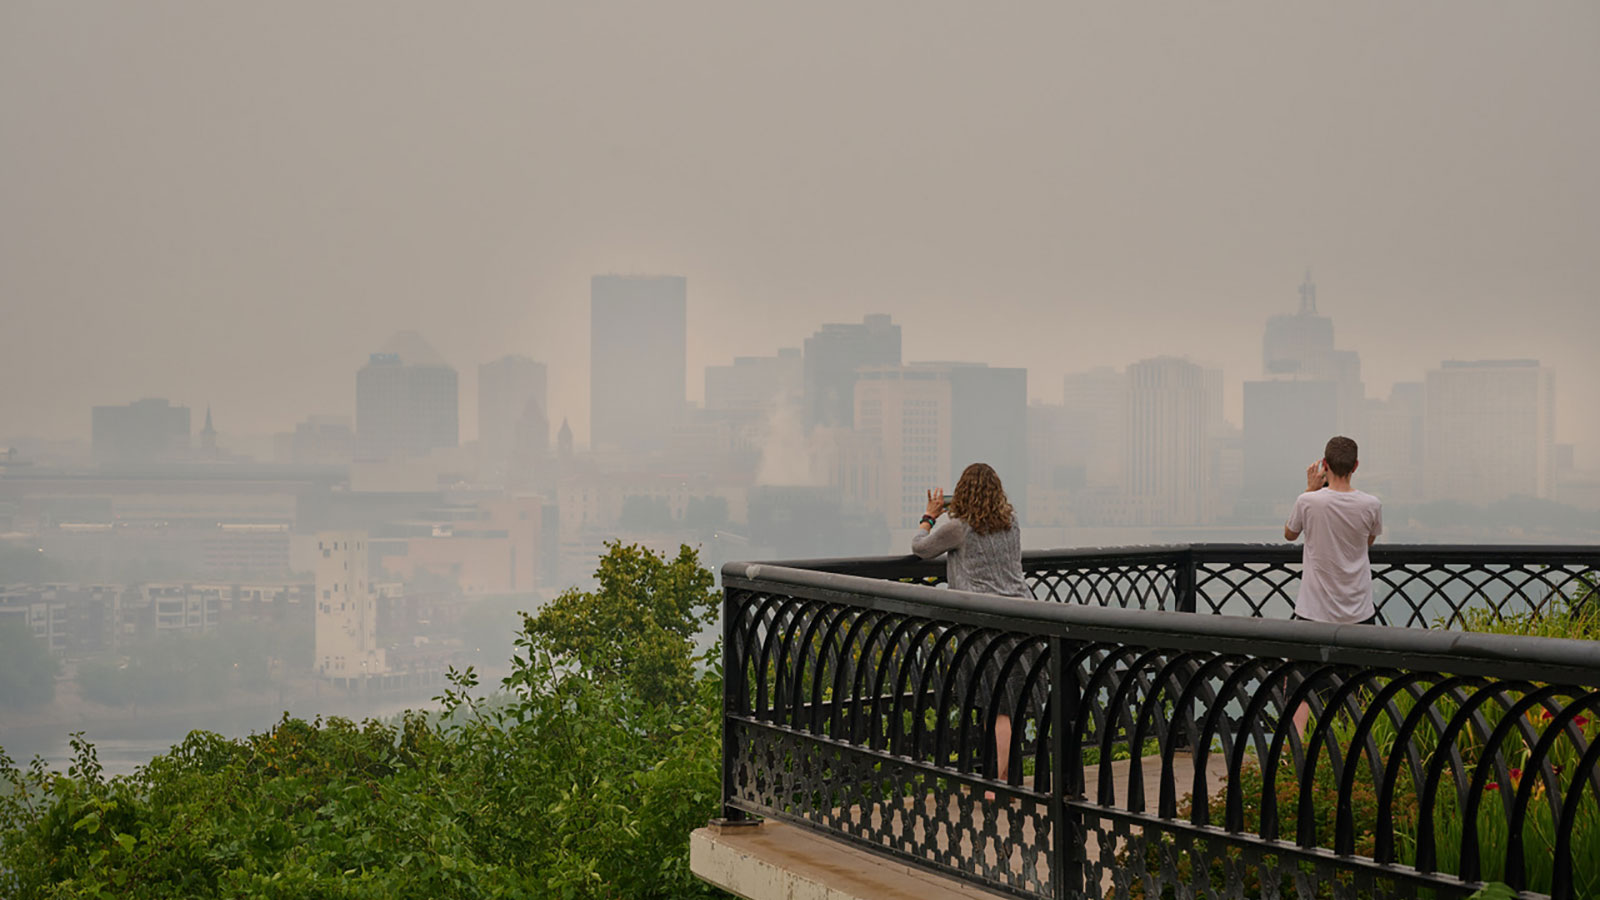 Two people in Saint Paul, Minnesota, taking photos of the city shrouded in smoke from wildfires in Canada